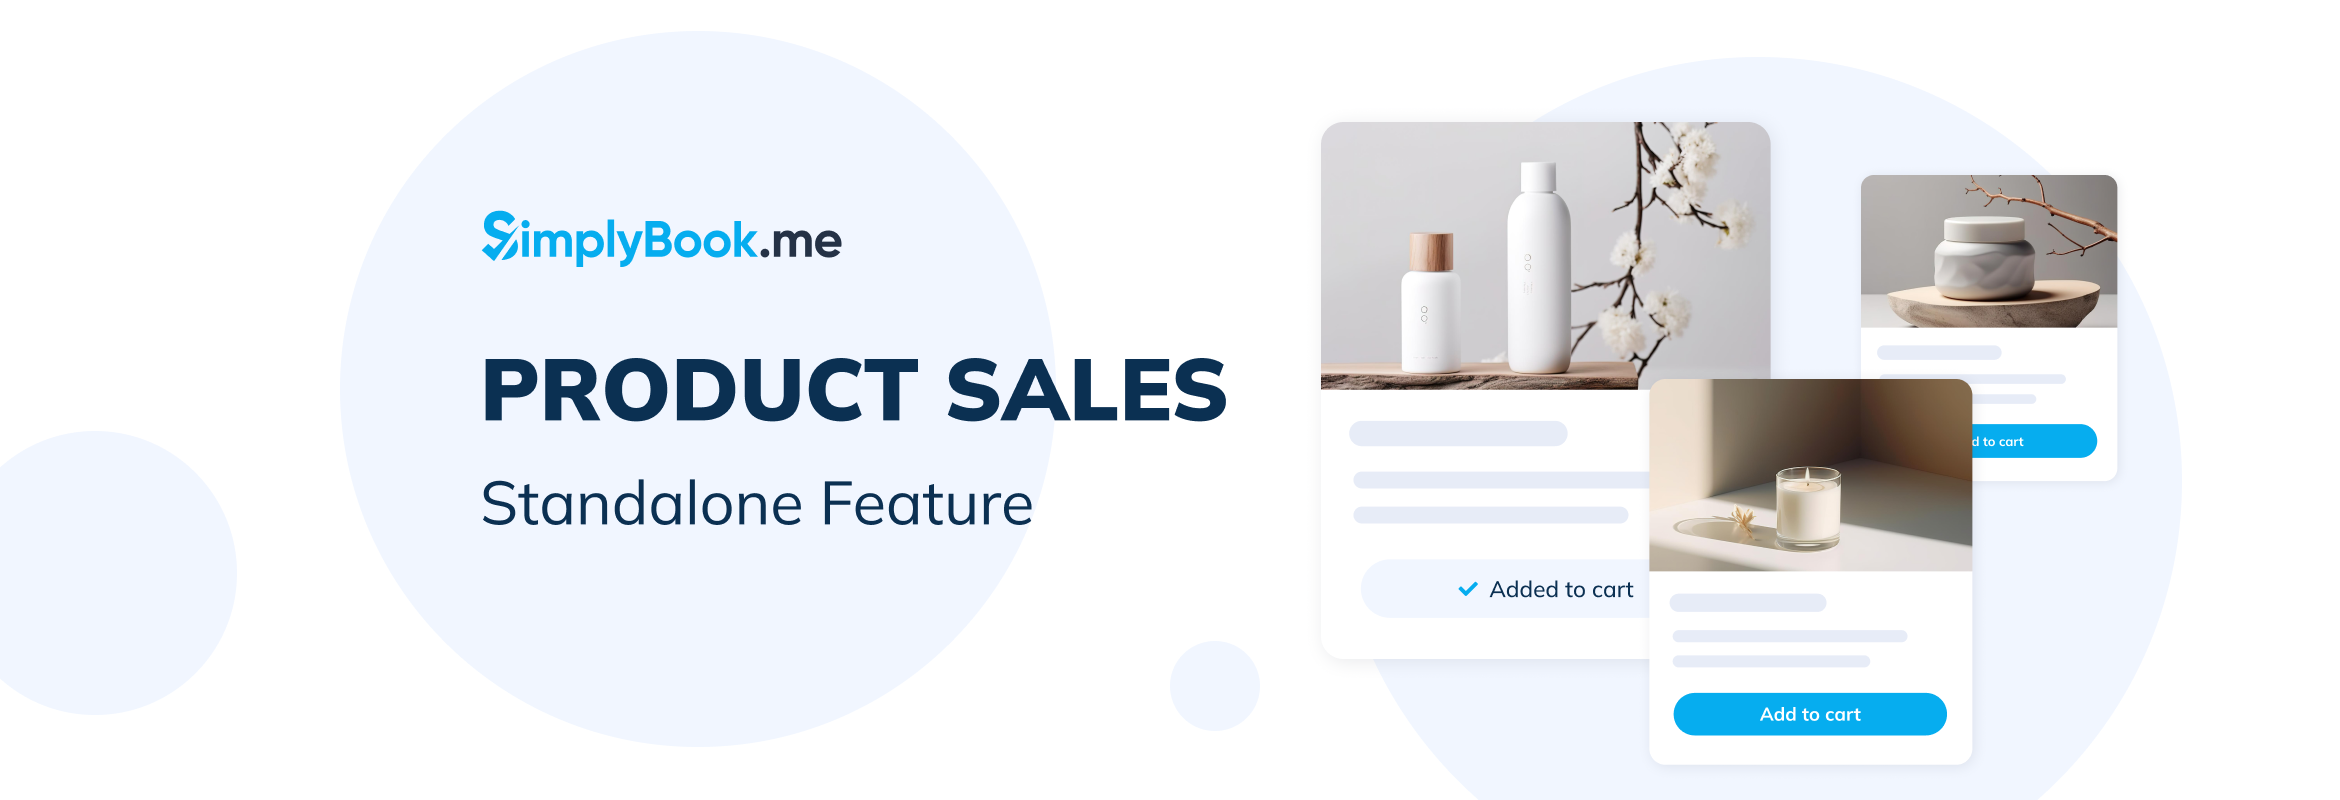 Products for sale standalone feature